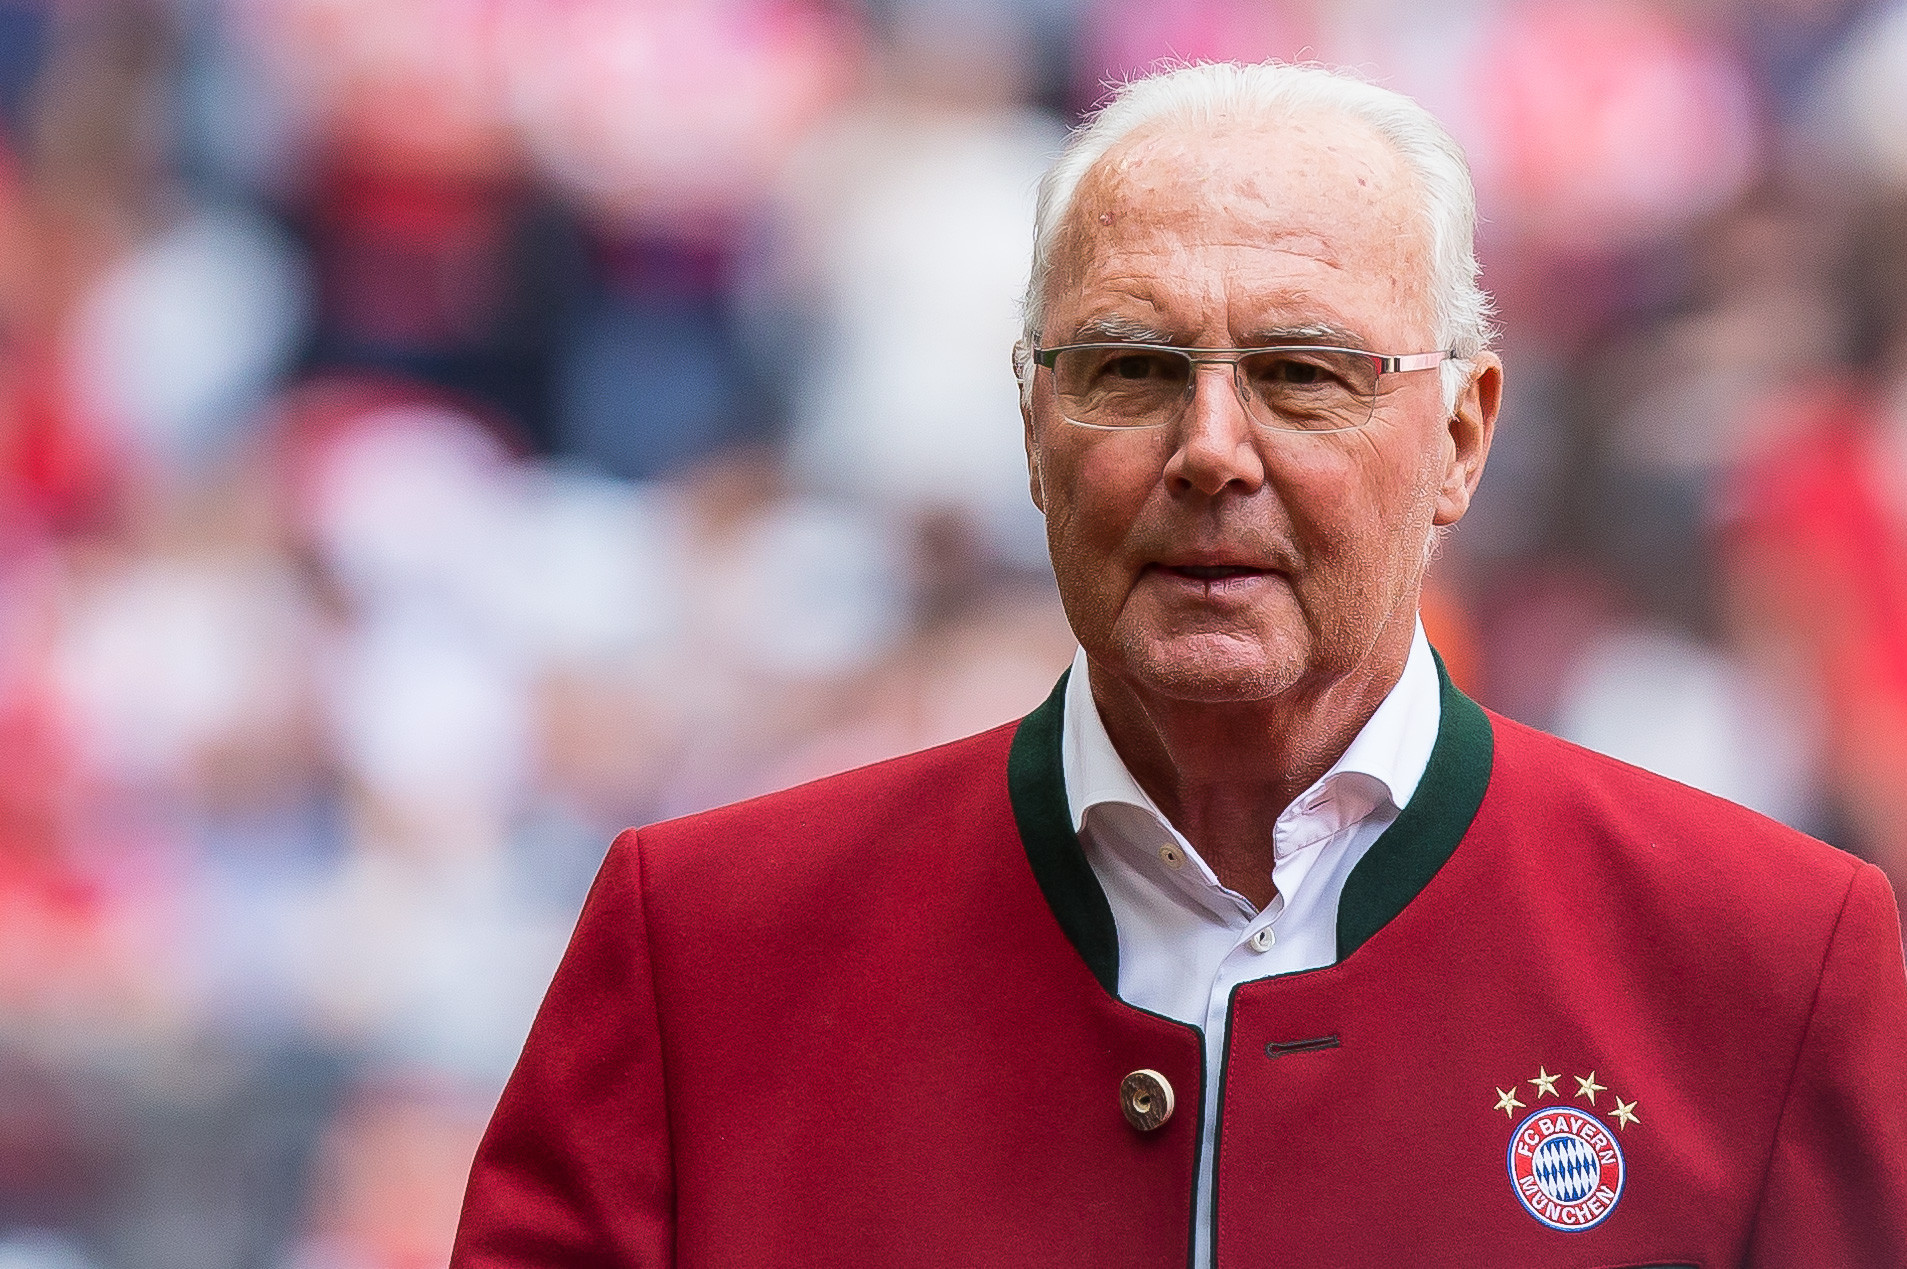 Proceedings were opened in Switzerland against Franz Beckenbauer and other officials last year ©Getty Images